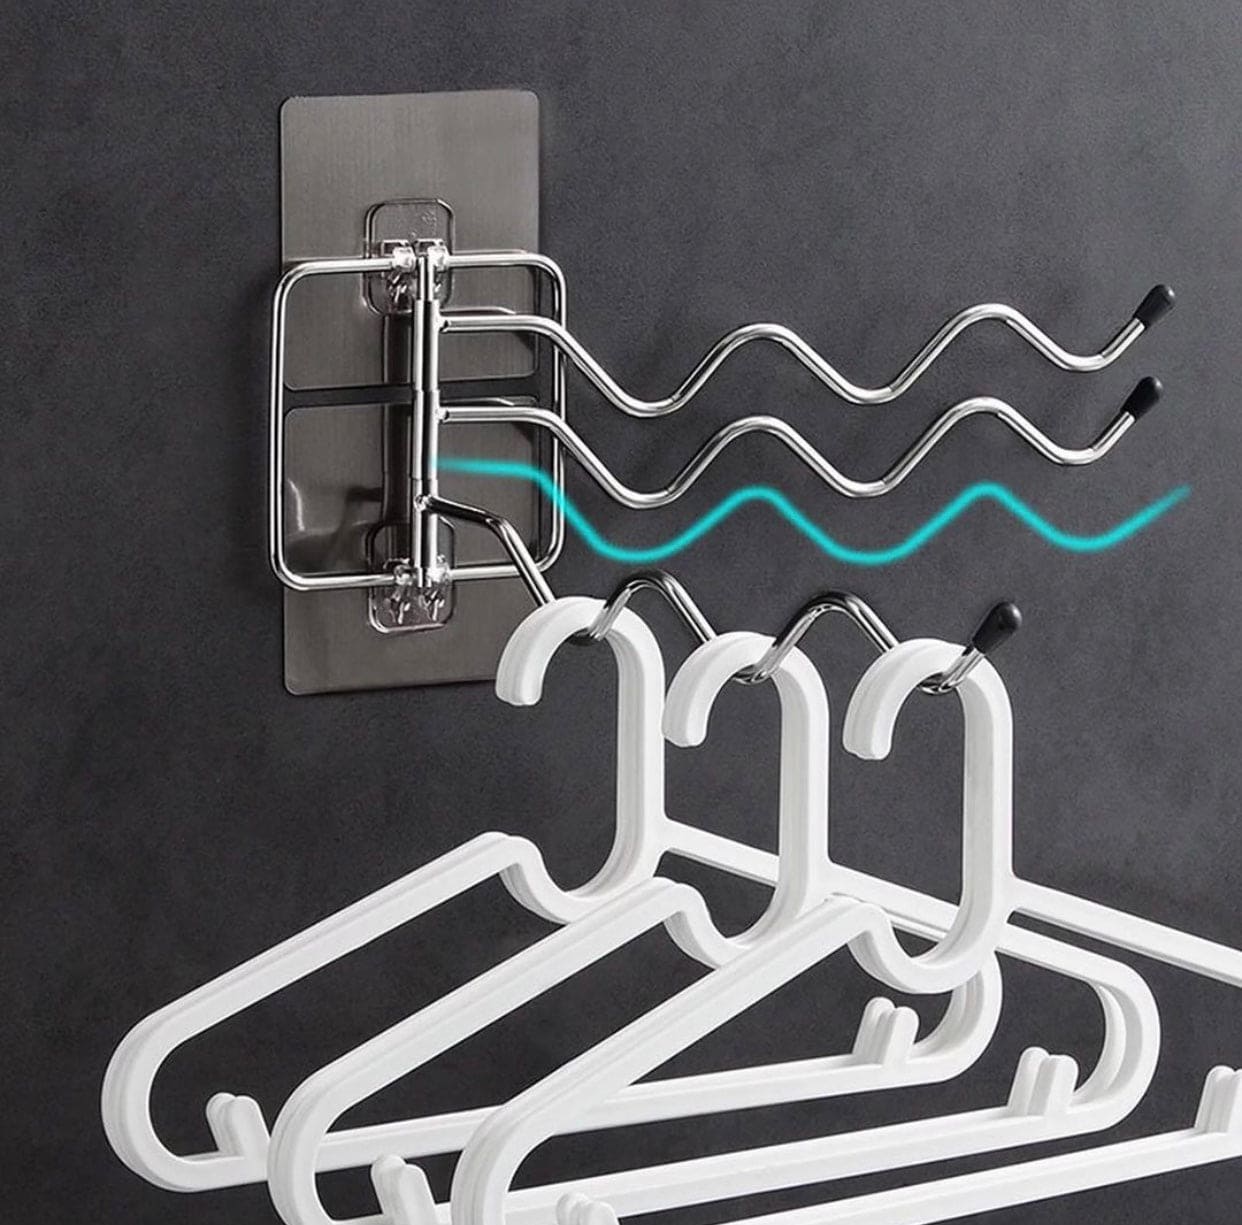 Stainless Steel Convenient Towel Rail Wall-Mounted Compact Bathroom Holder, Arm Bathroom Swing Towel Hanger, Premium Bathroom Holder, Wave Towel Holder